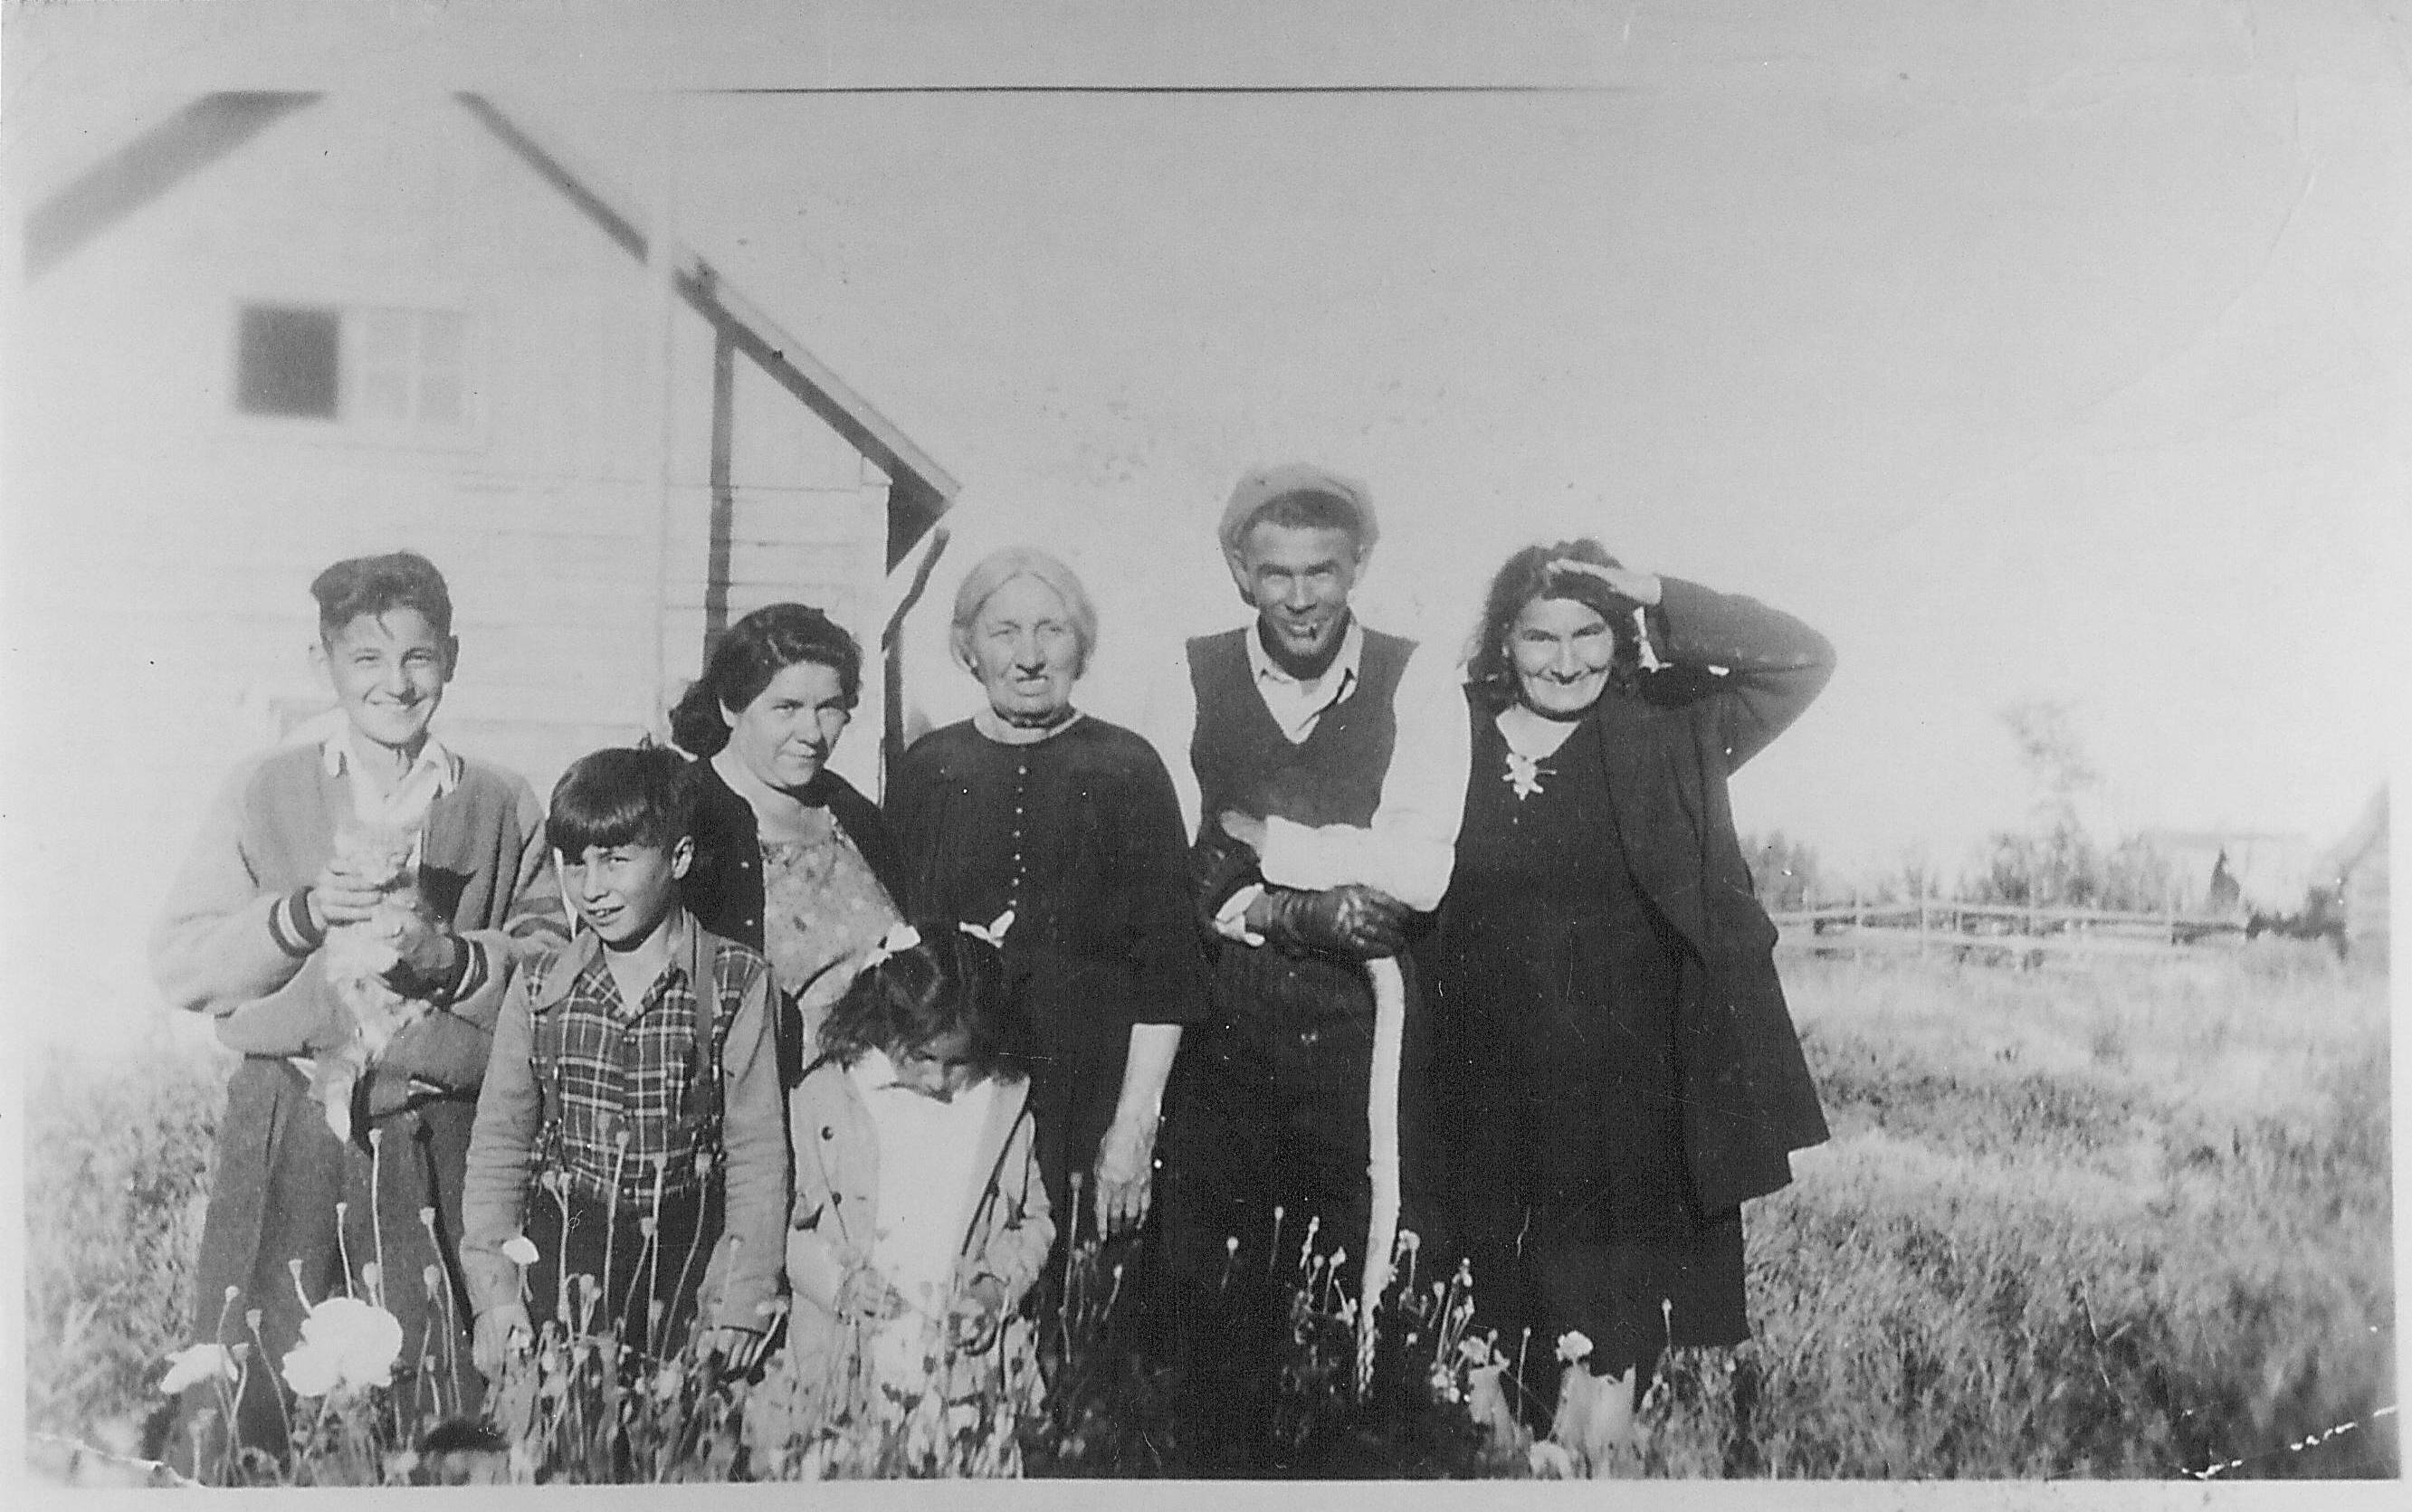 We believe Sarah Charles is the Elderly lady in the middle with Harry Cardinal and Lillian (Charles) Cardinal on her right. We need help identifying the 4 younger people on the left side of the group.
If you can confirm or help identify these individuals we would certainly appreciate it!
*EDIT* 
The individuals from L-R have been identified as Steve Cardinal, Pete Lizotte, Marie Lizotte, Jane Lizotte.
990.4.20.23 / Ducharme, Iola